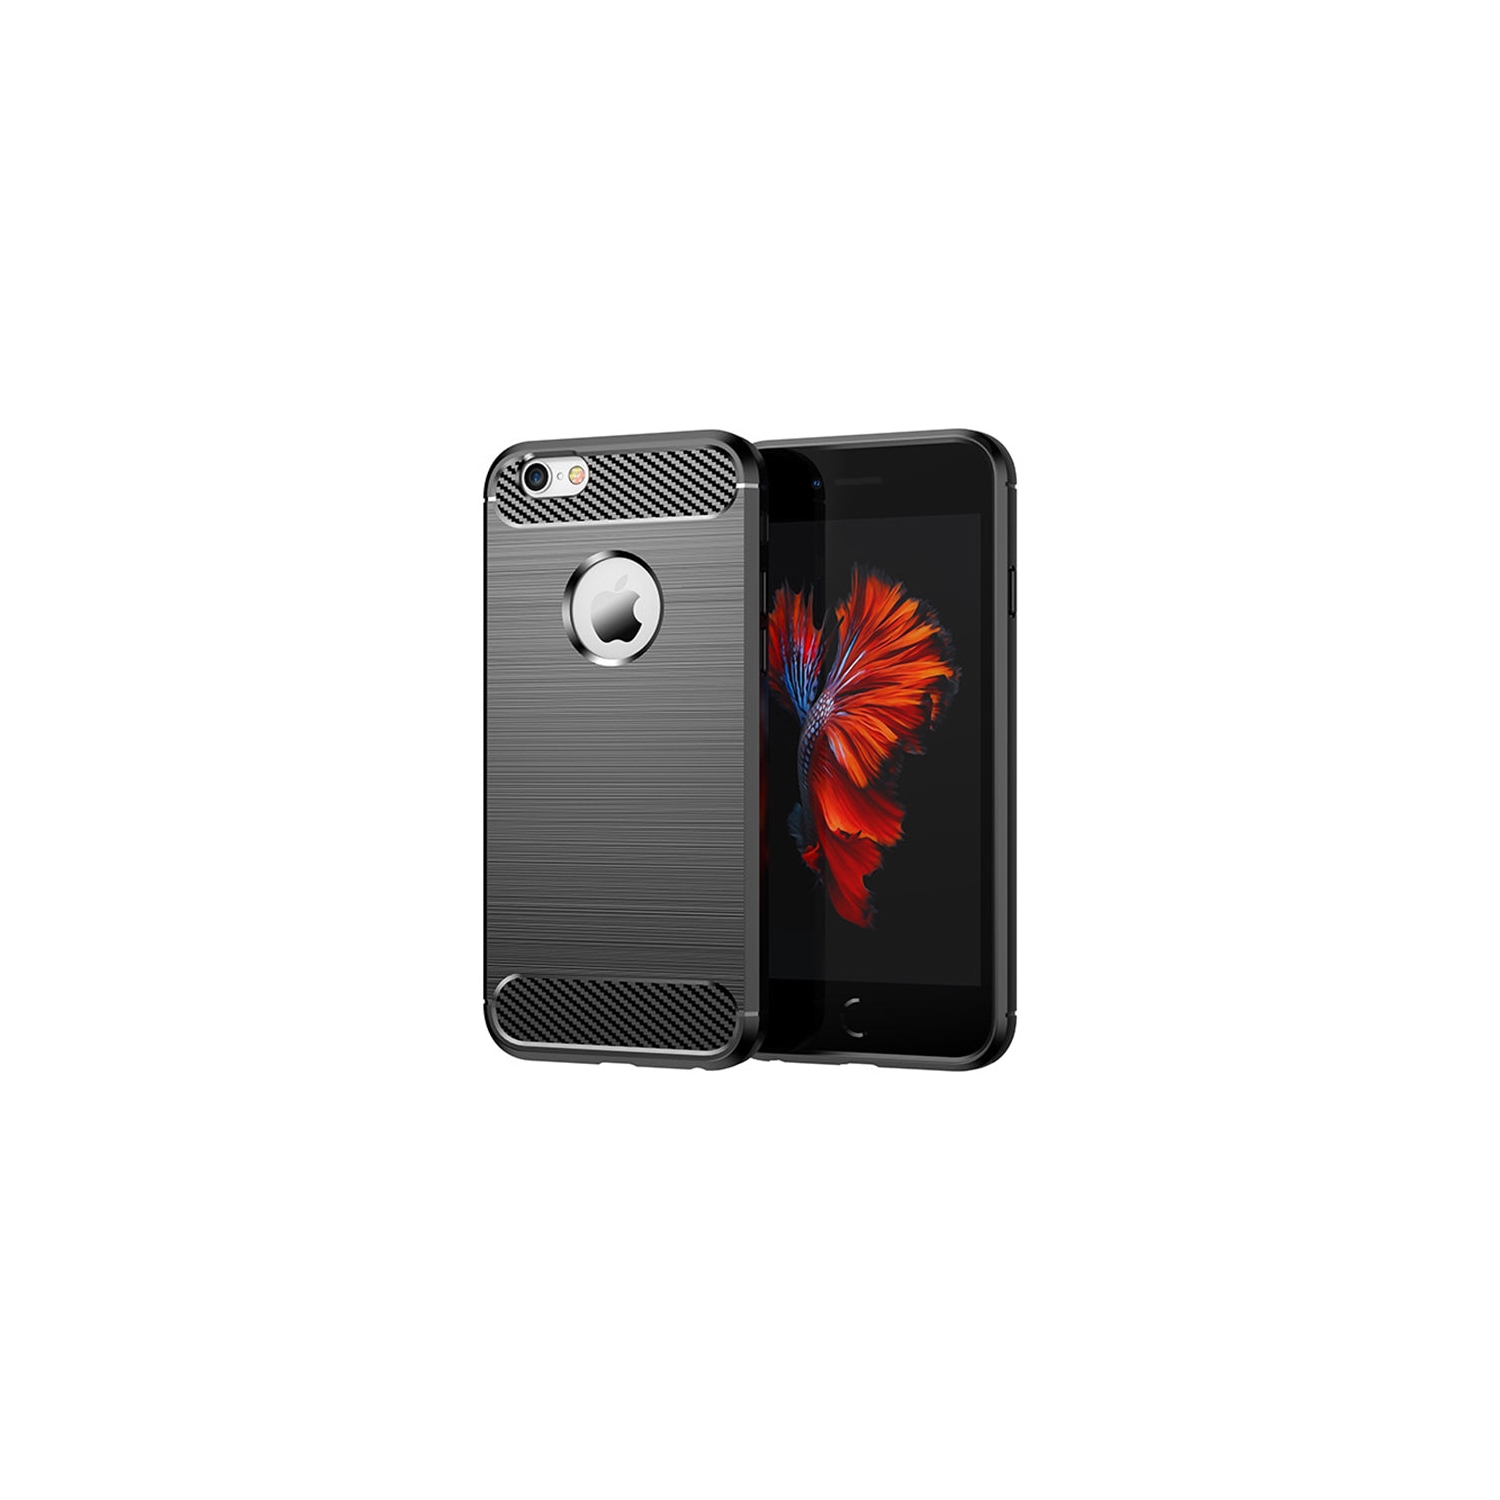 PANDACO Black Brushed Metal Case for iPhone 6 Plus or iPhone 6S Plus